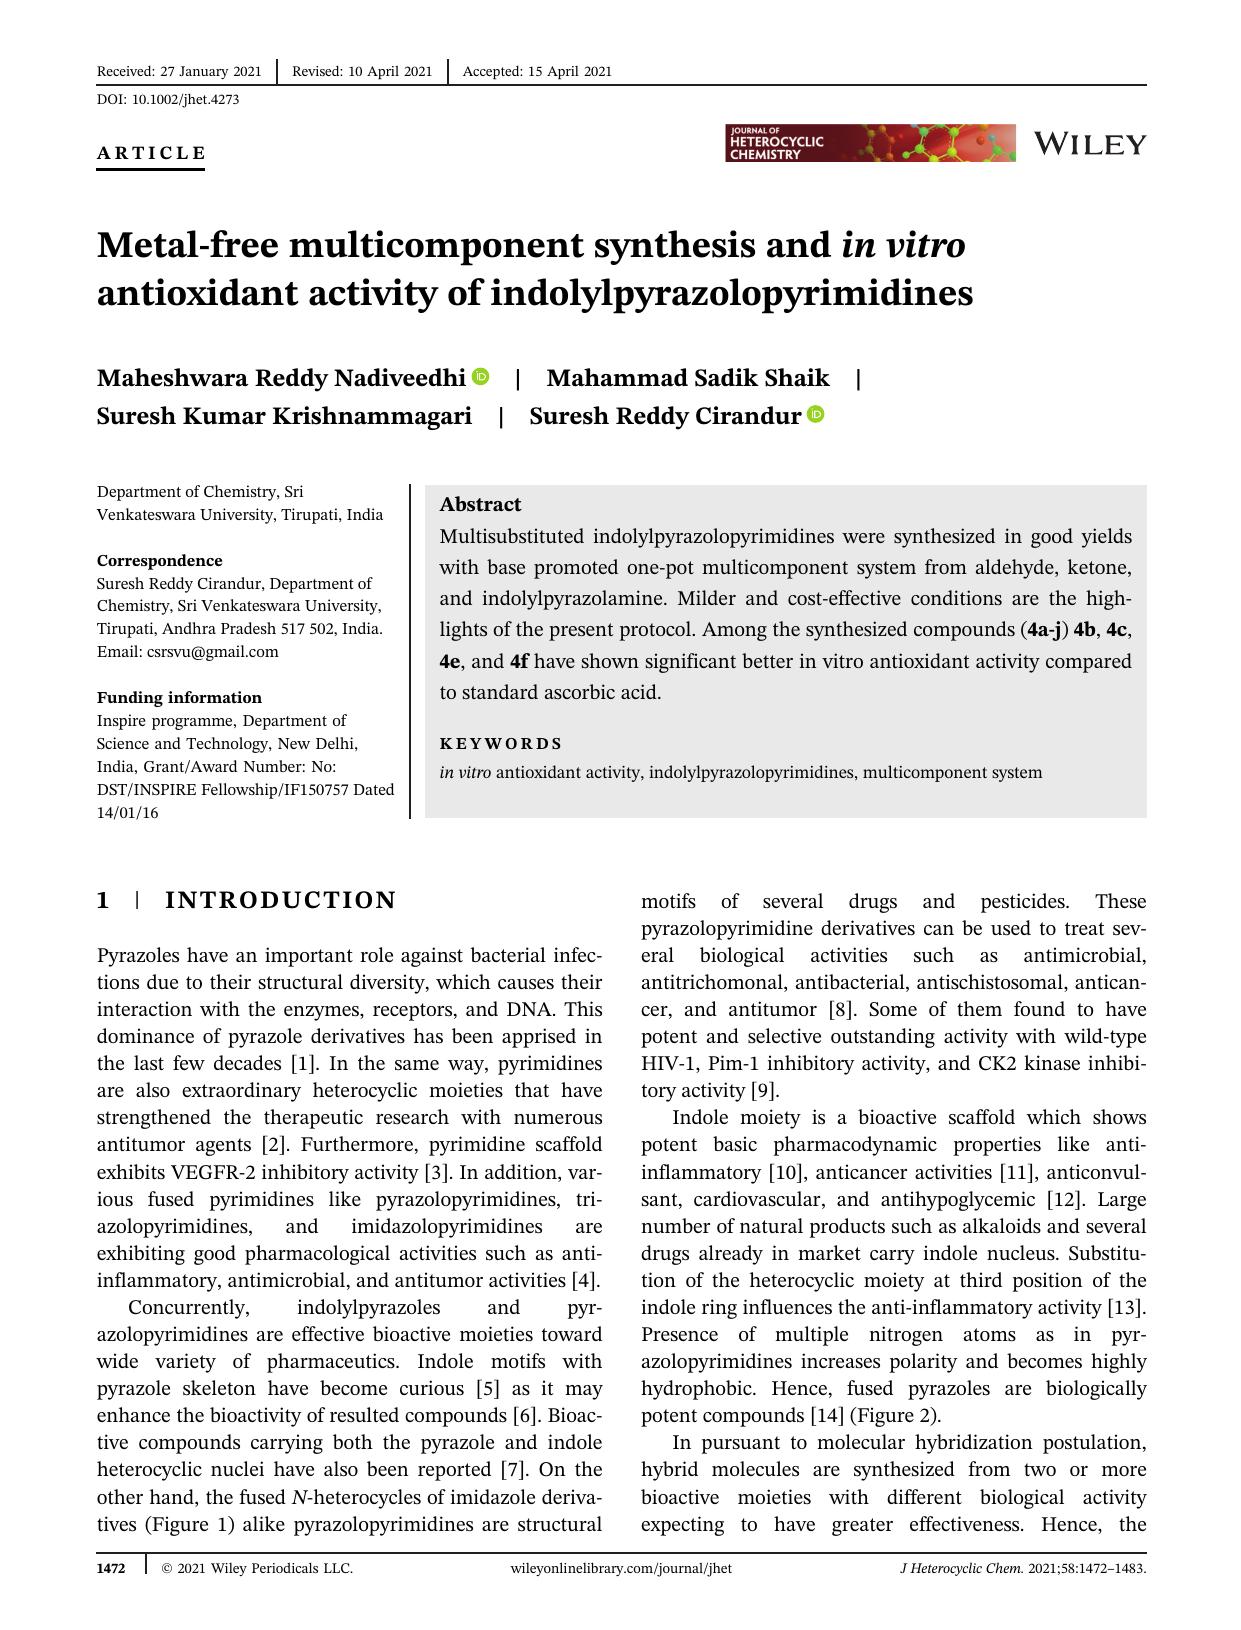 Metal Free Multicomponent Synthesis and In vitro Antioxidant Activity of Indolylpyrazolopyrimidines by Unknown